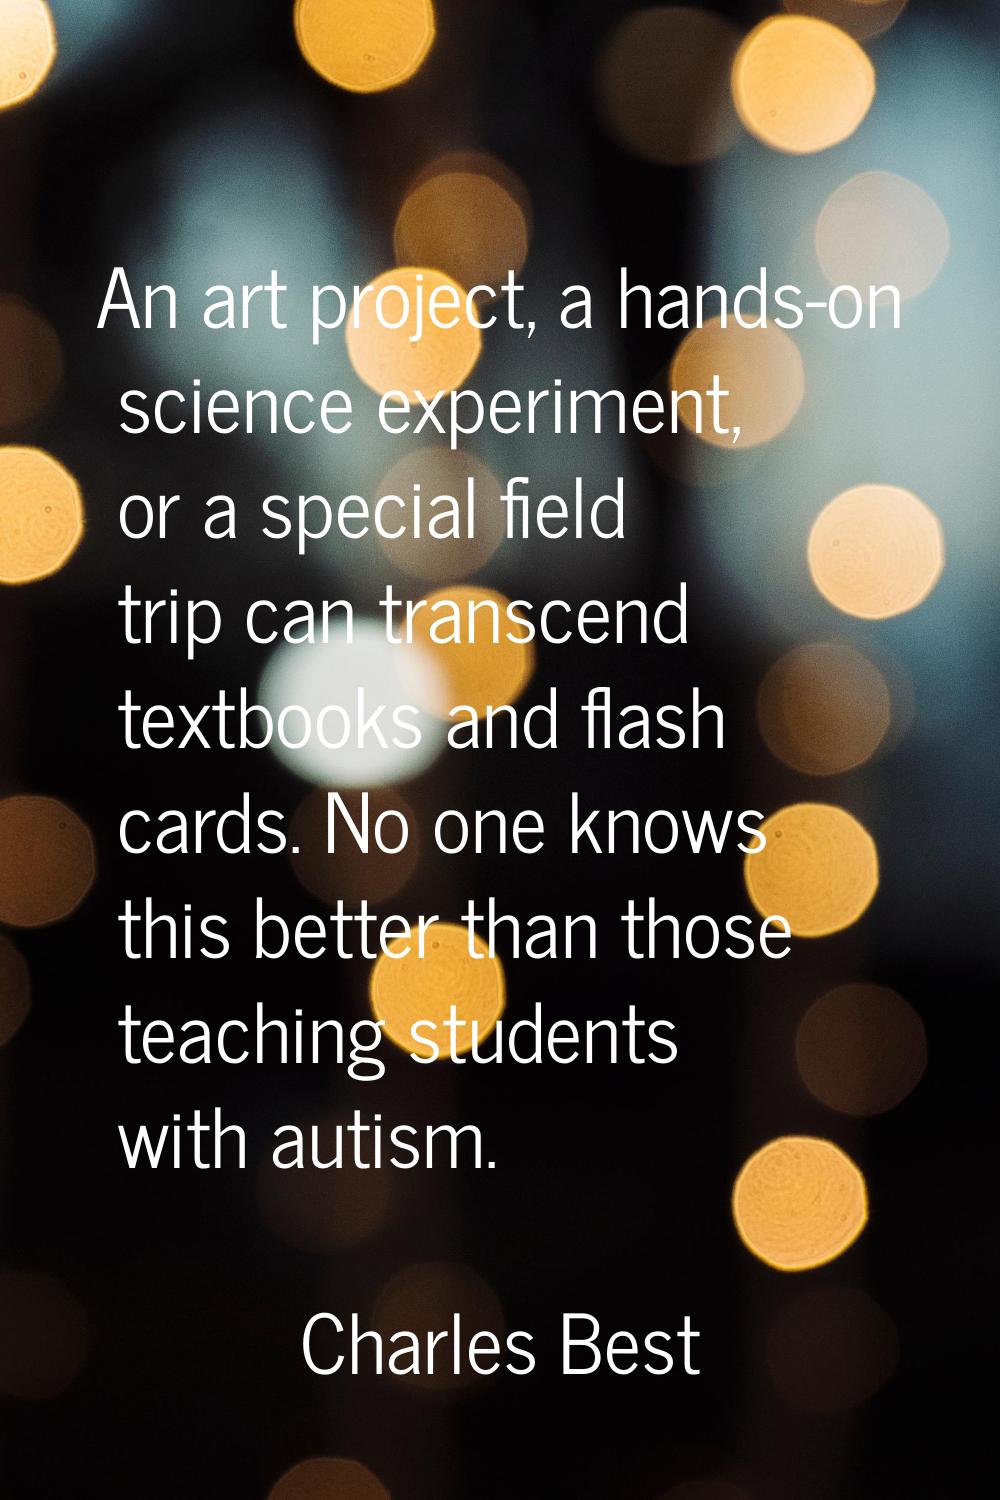 An art project, a hands-on science experiment, or a special field trip can transcend textbooks and 